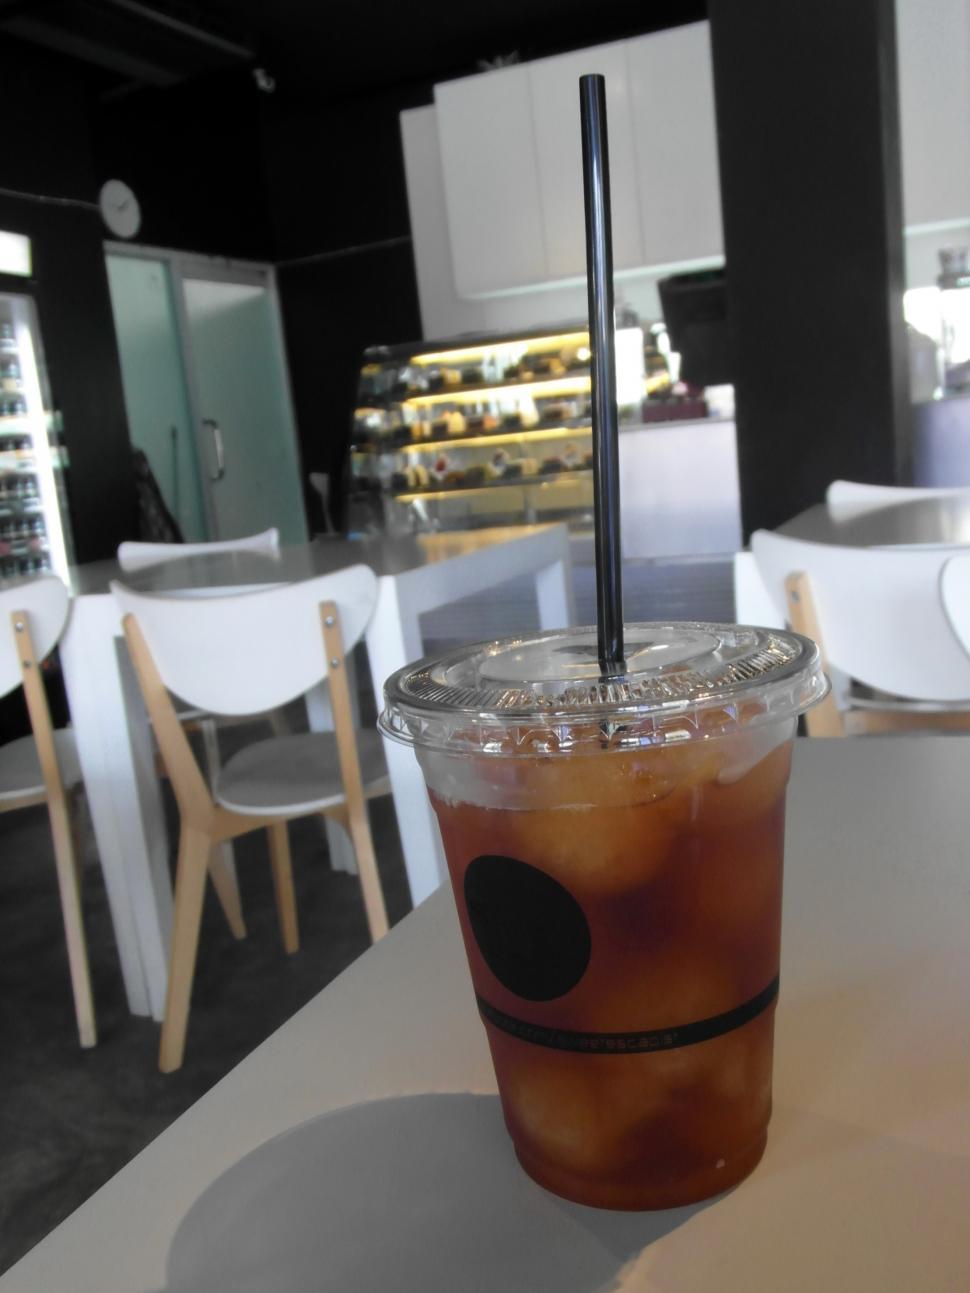 Free Image of Iced Lemon Tea in a Cafe 